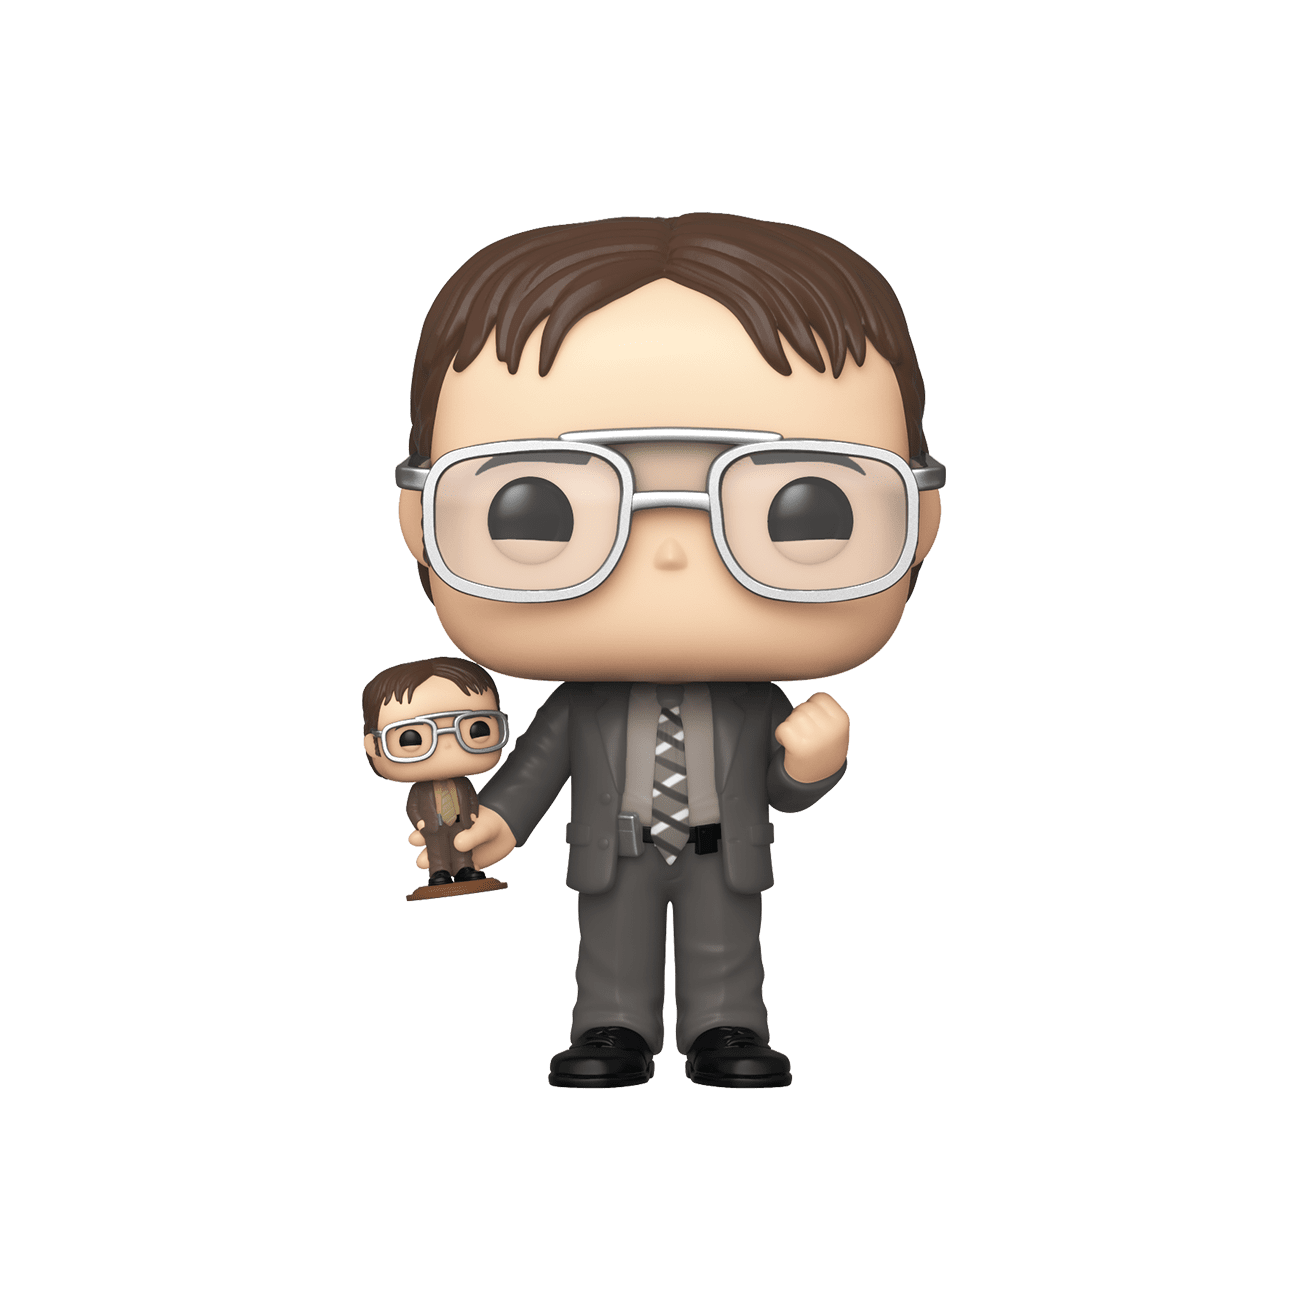 Funko POP! Television: The Office - Dwight with Dwight Exclusive NYCC 2019